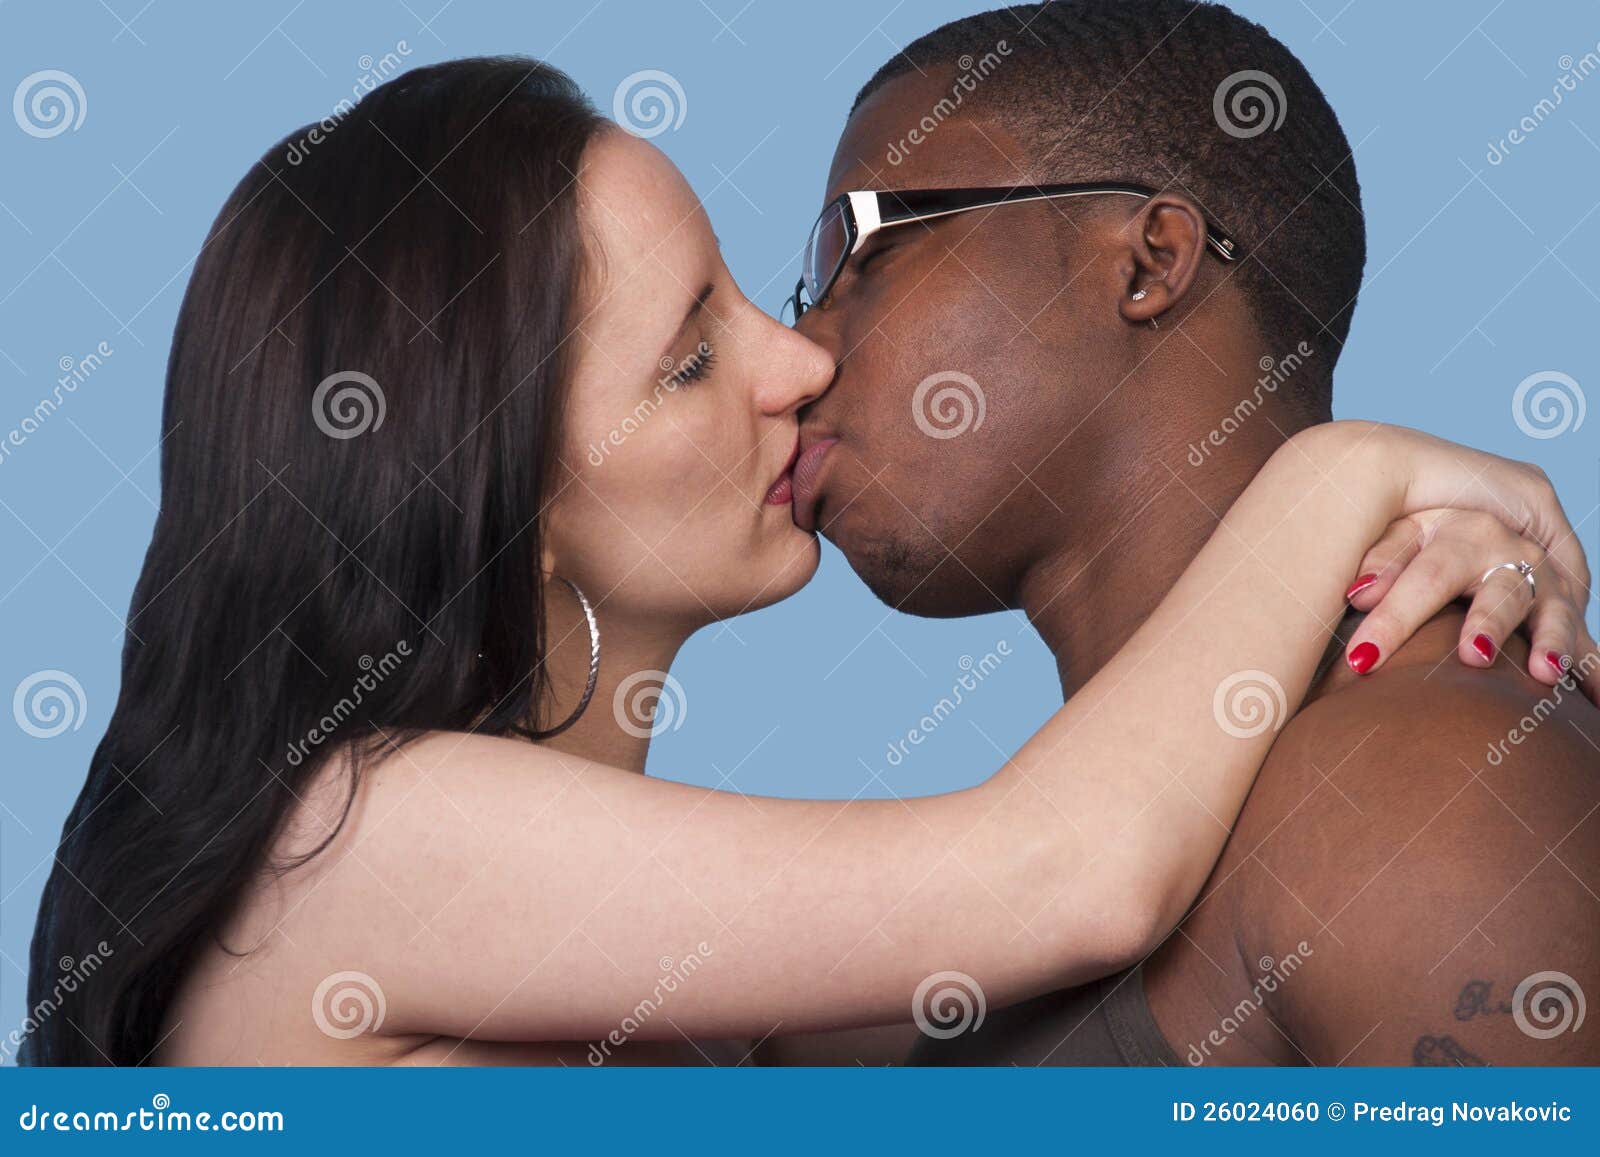 carterrys orr share black and white girls making out photos